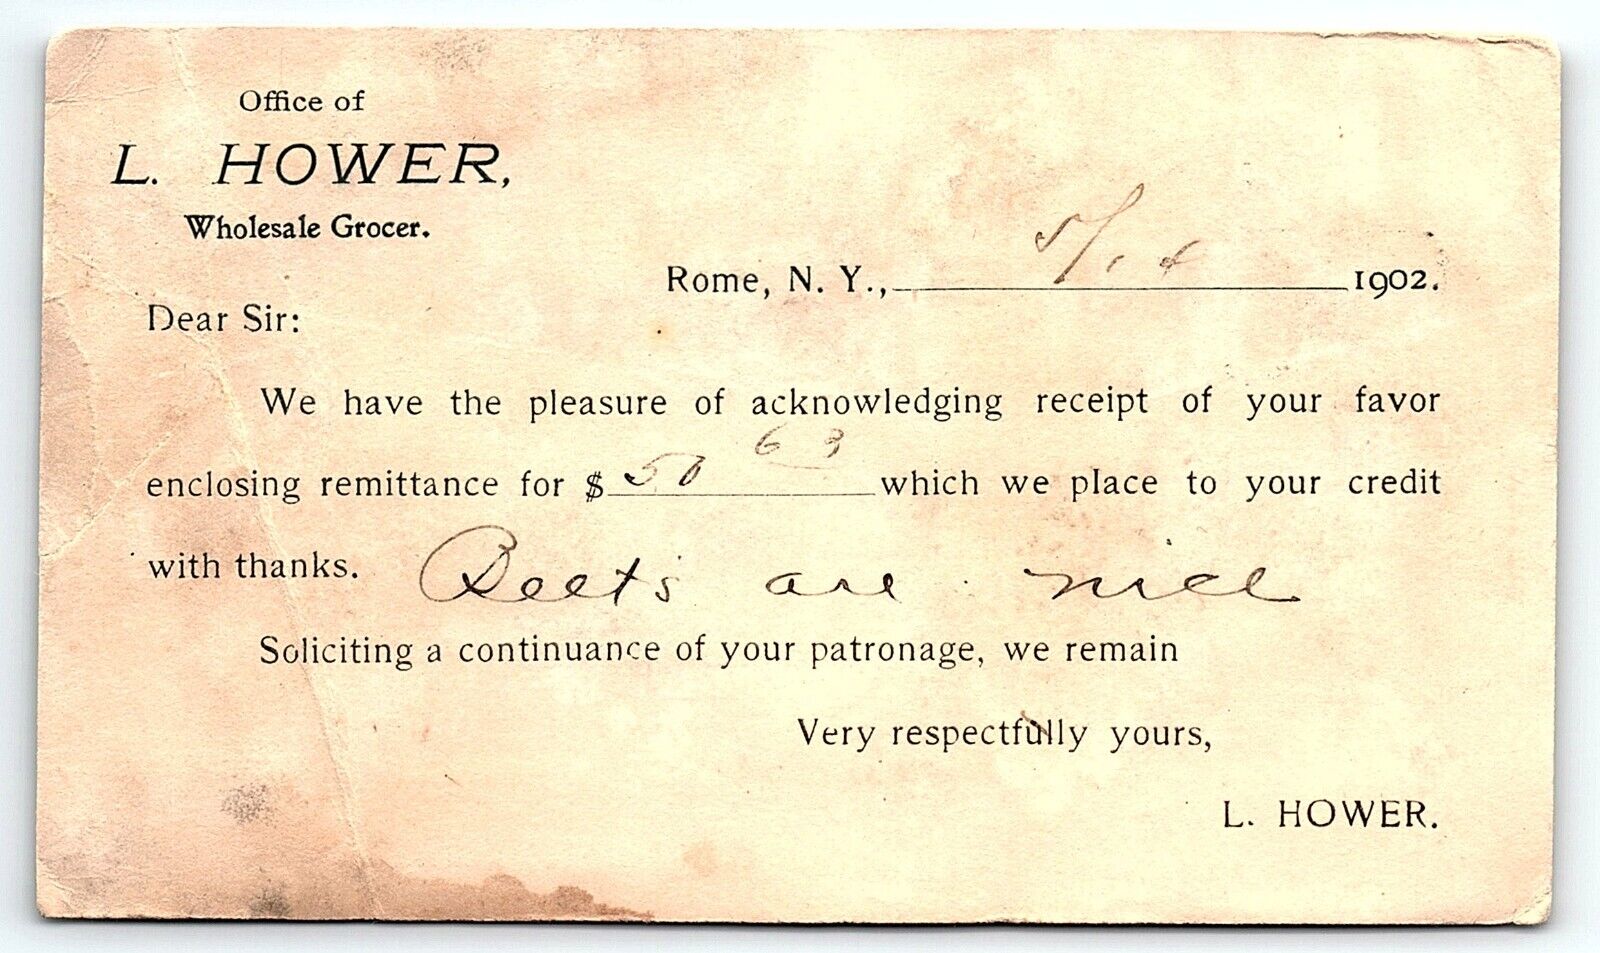 1902 ROME NEW YORK L HOWER WHOLESALE GROCER MONTHLY REMITTANCE POSTCARD P716